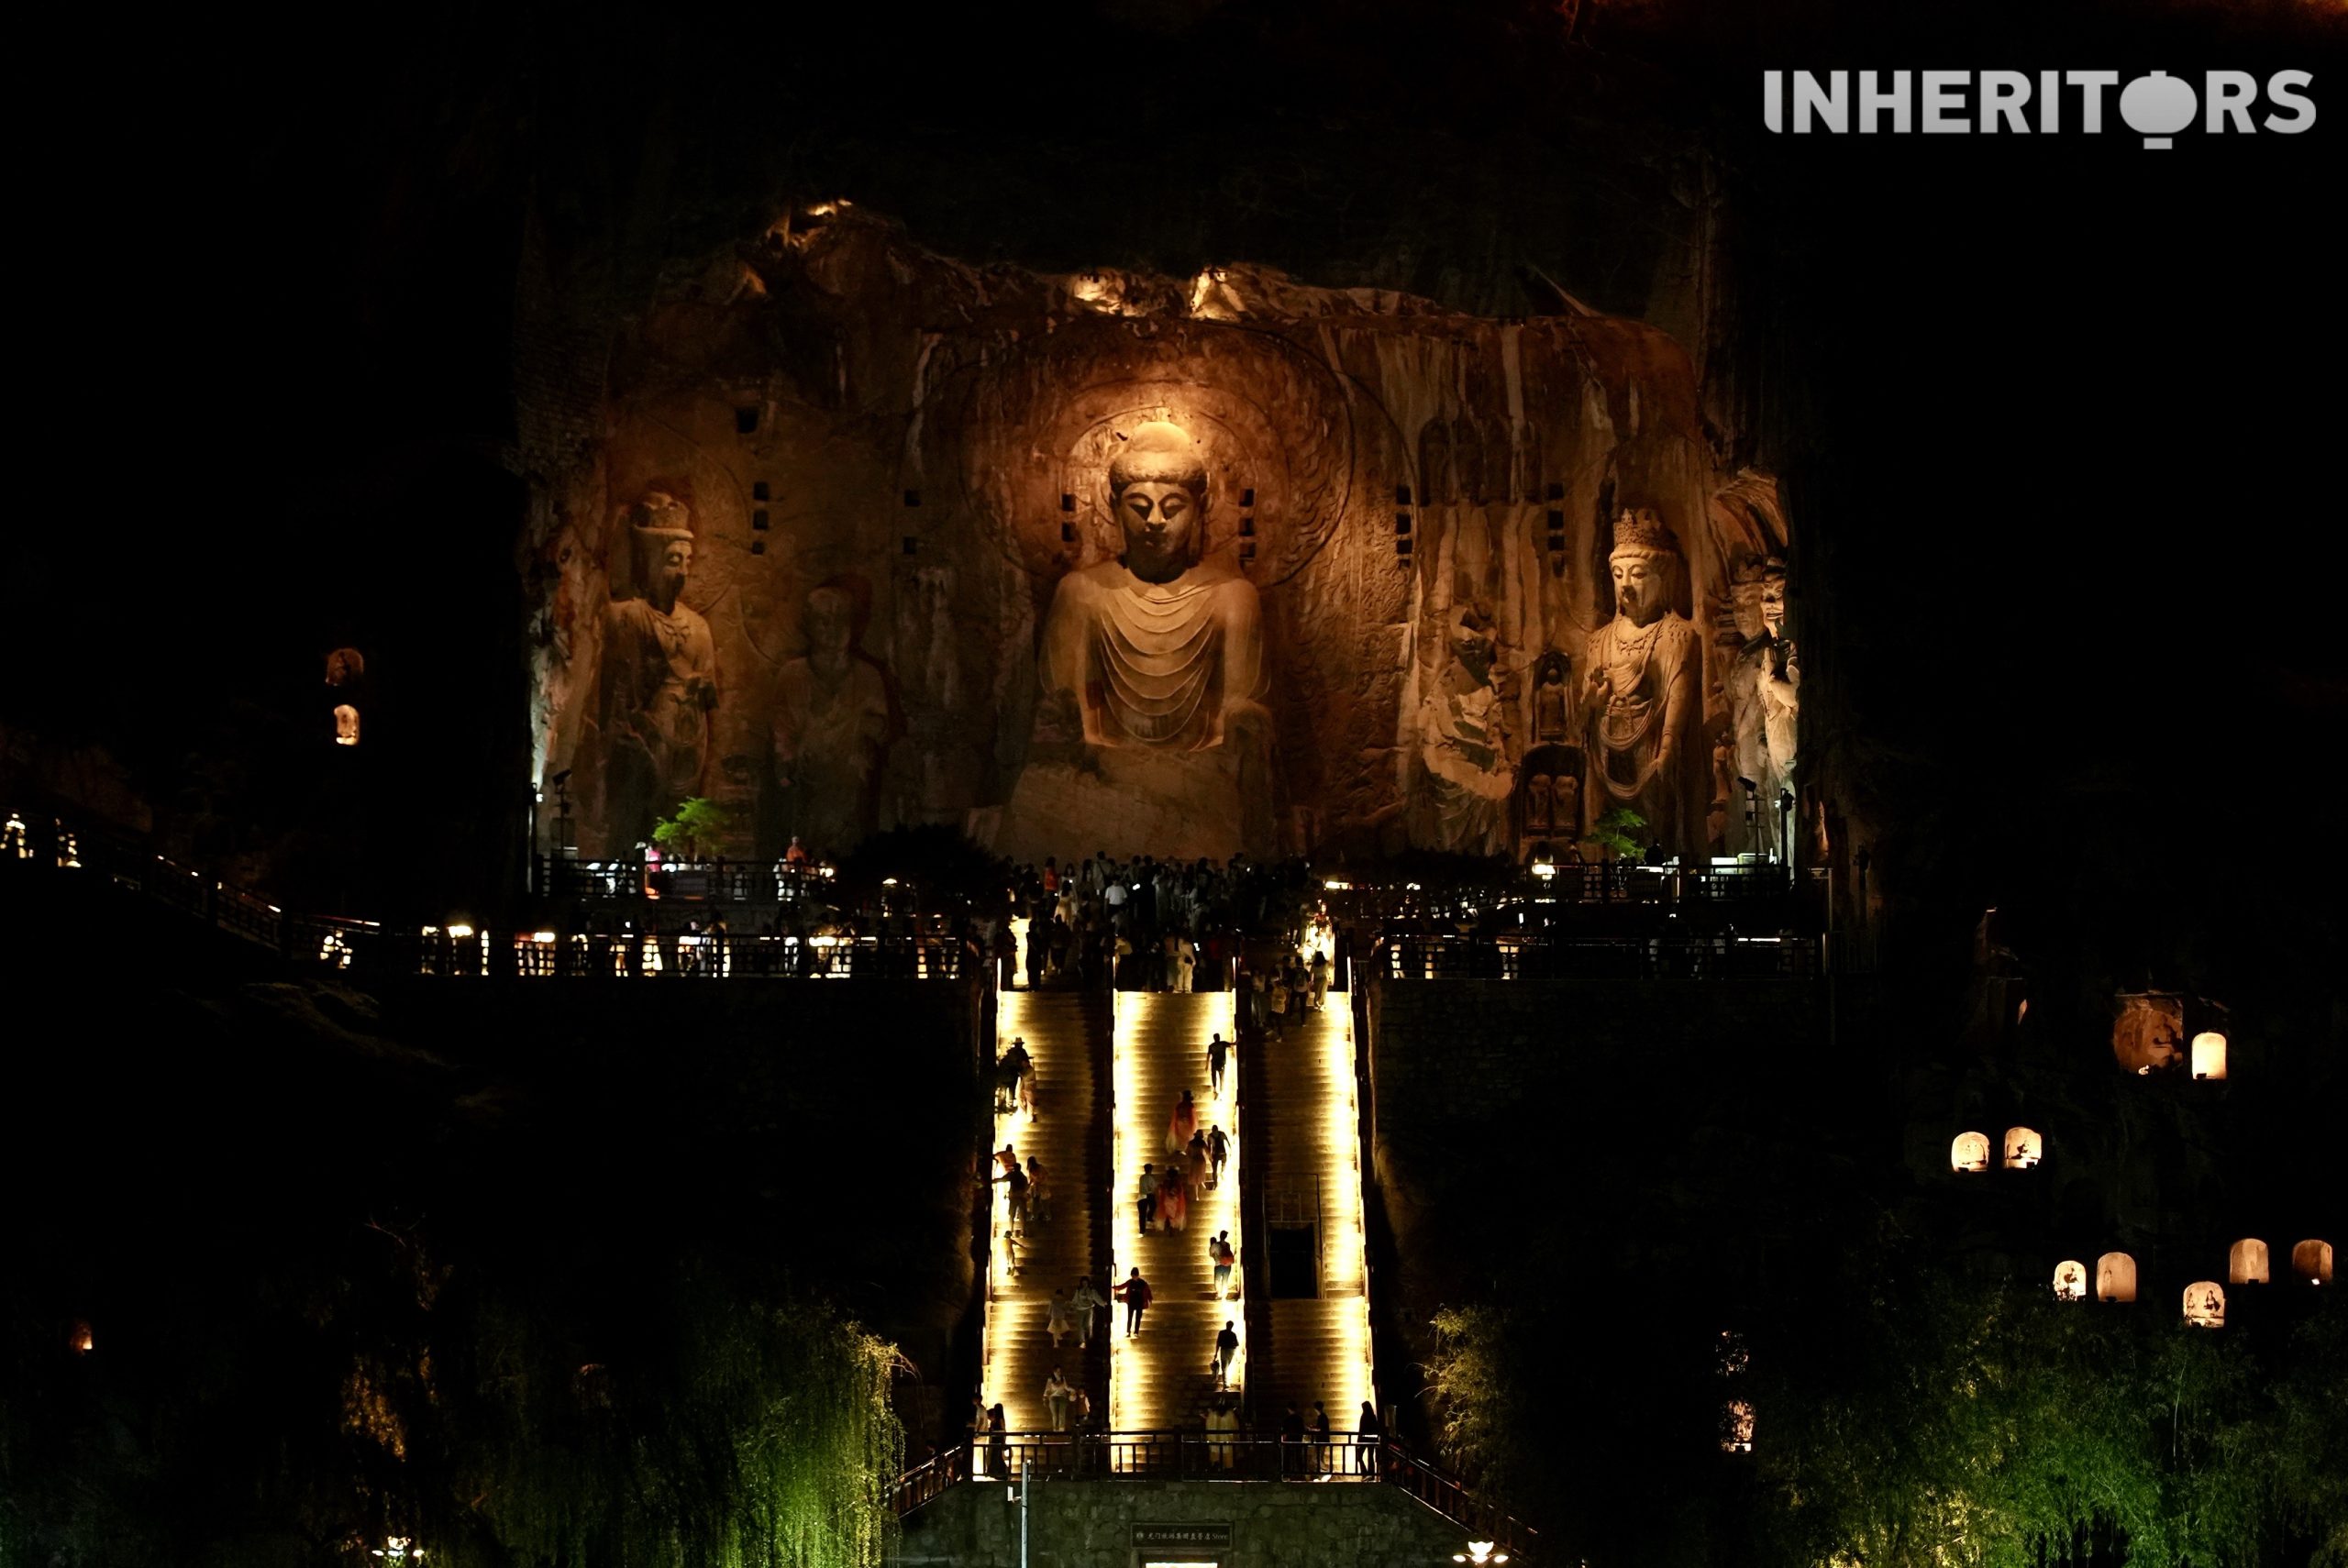 Longmen Grottoes: An incredible collection of Buddhist statues